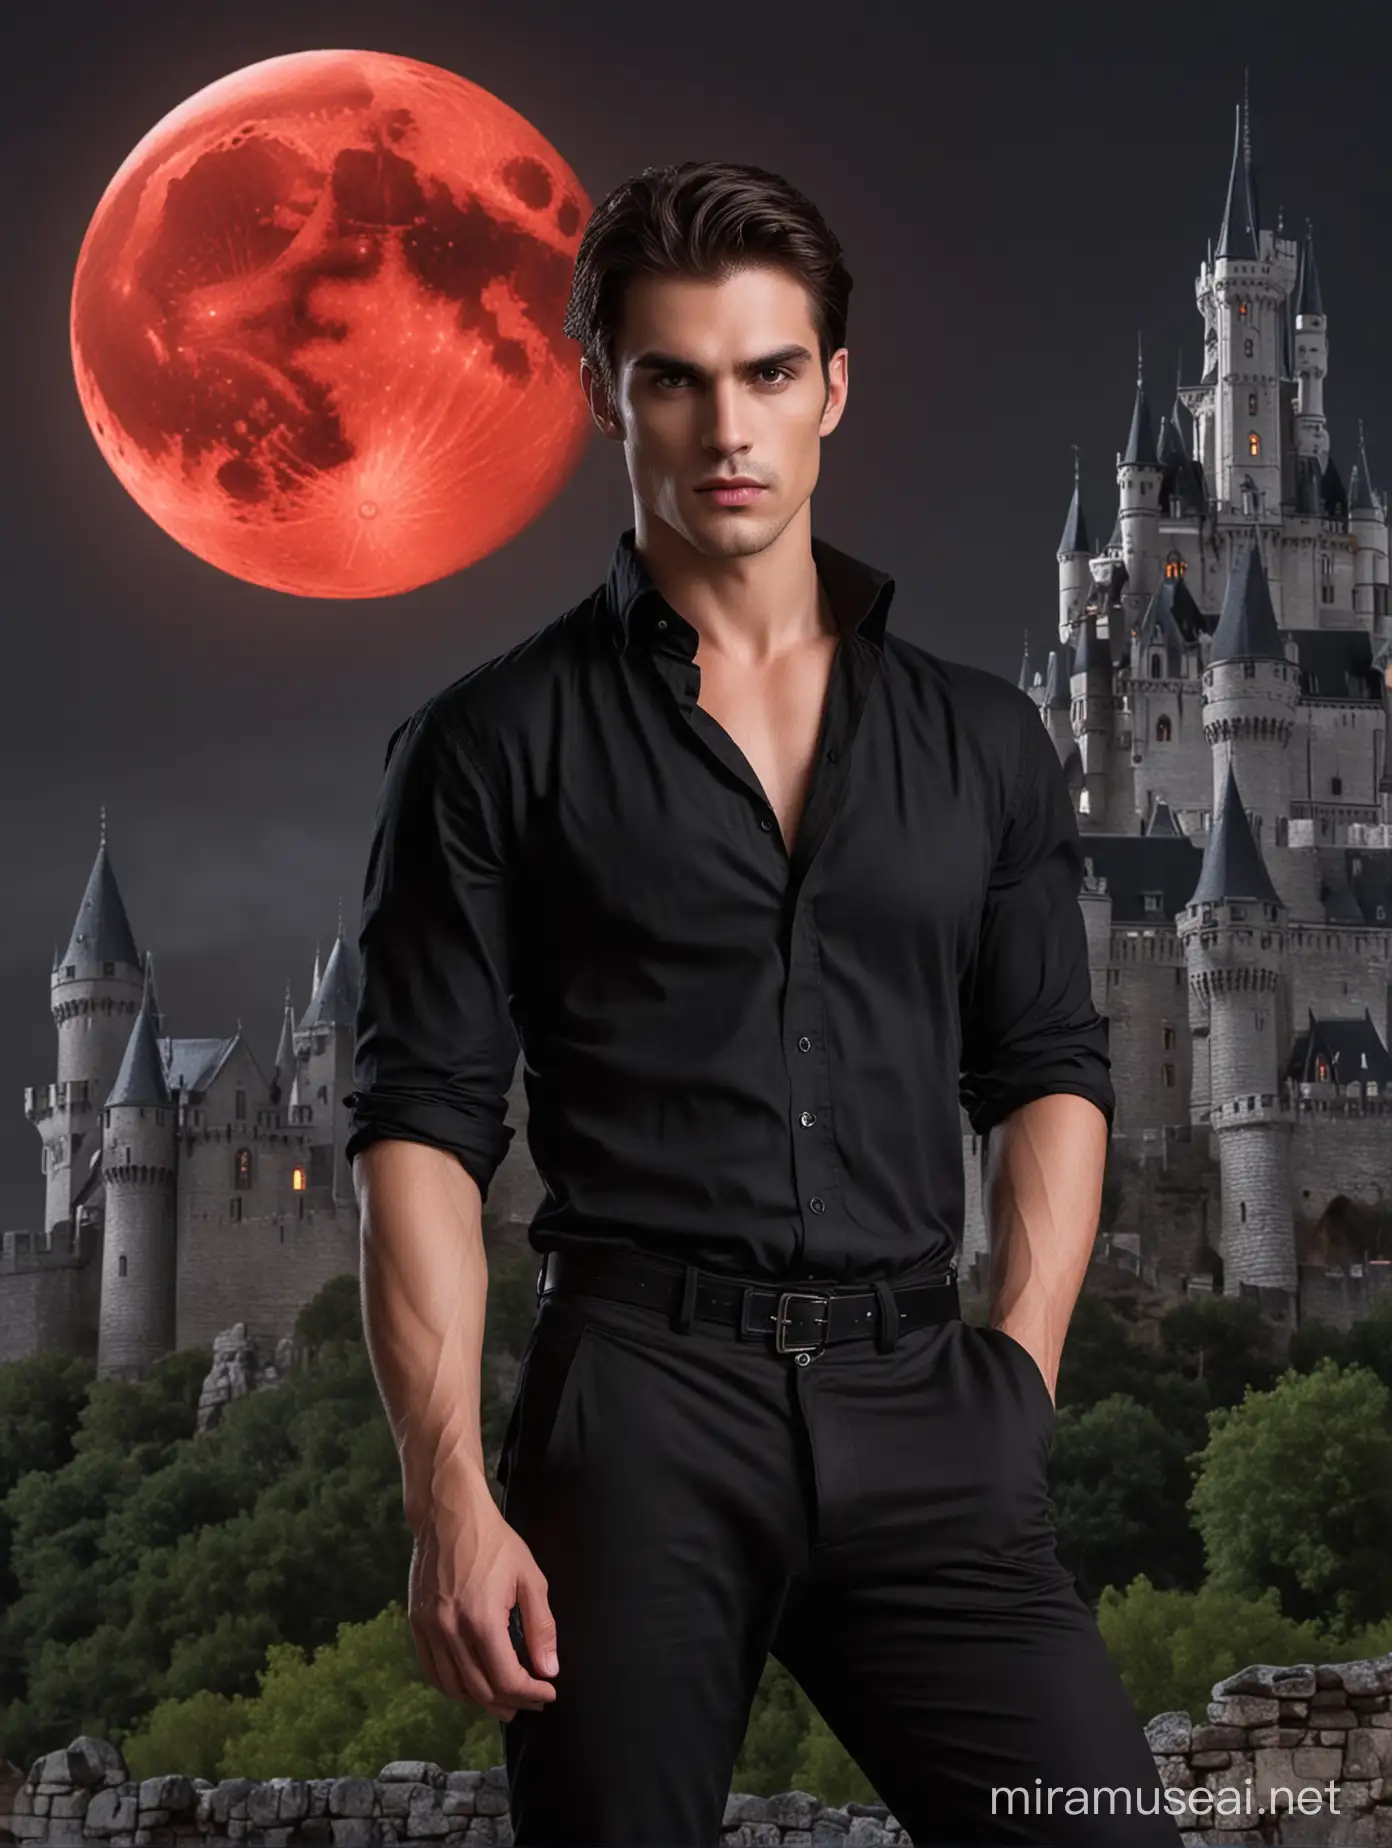 Intense Vampire Portrait Handsome Vampire in Black Shirt and Pants with Castle Background